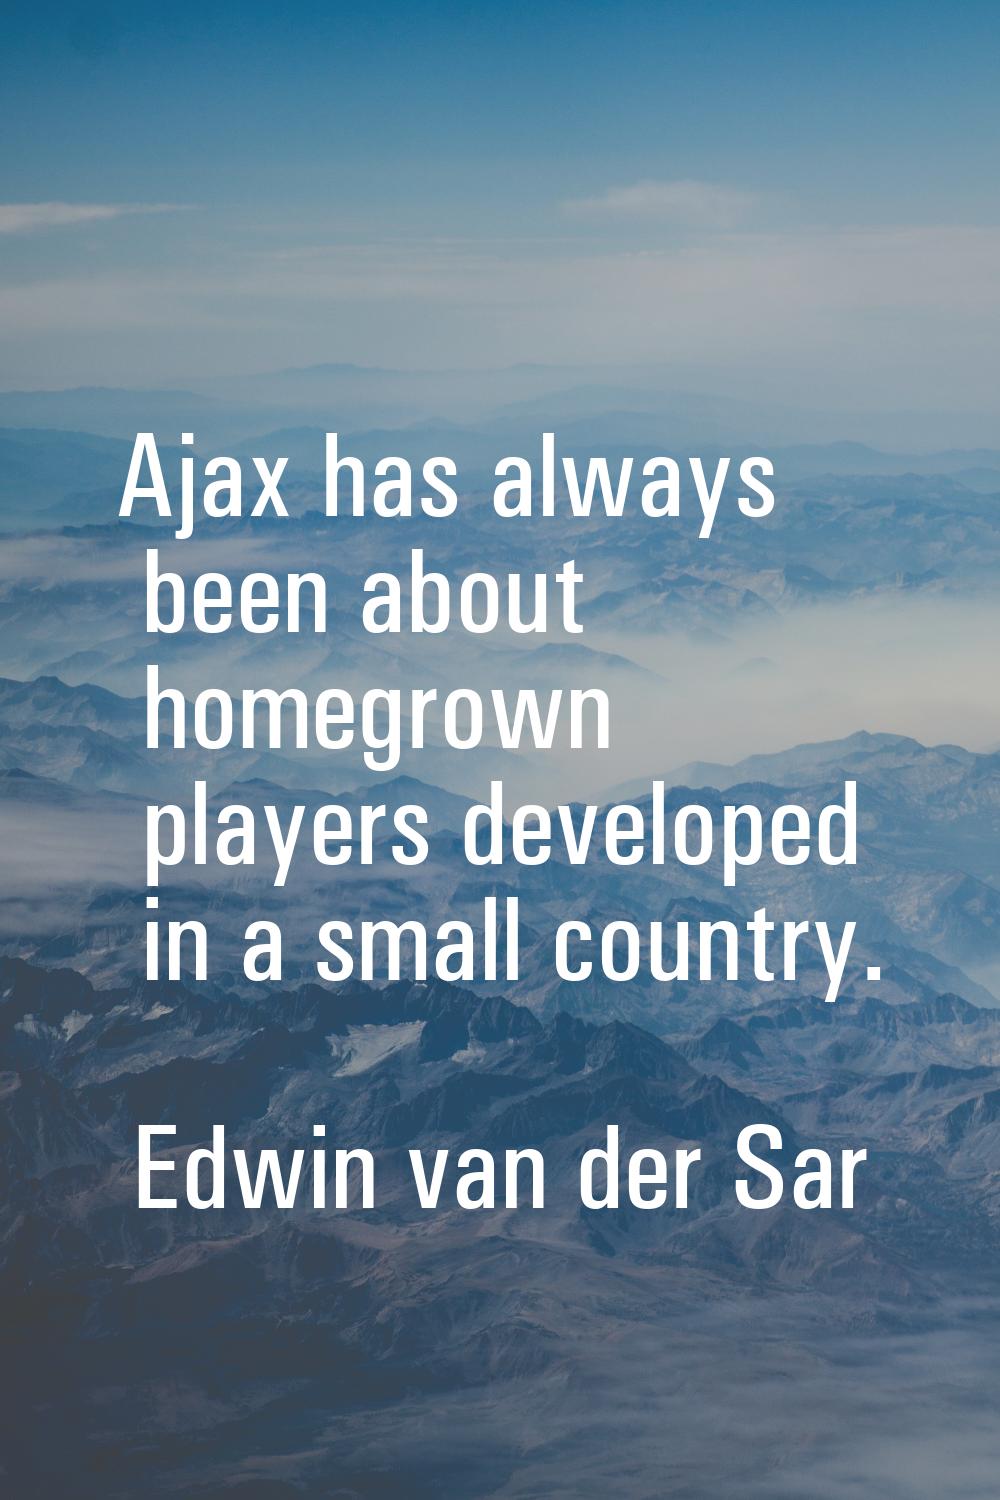 Ajax has always been about homegrown players developed in a small country.